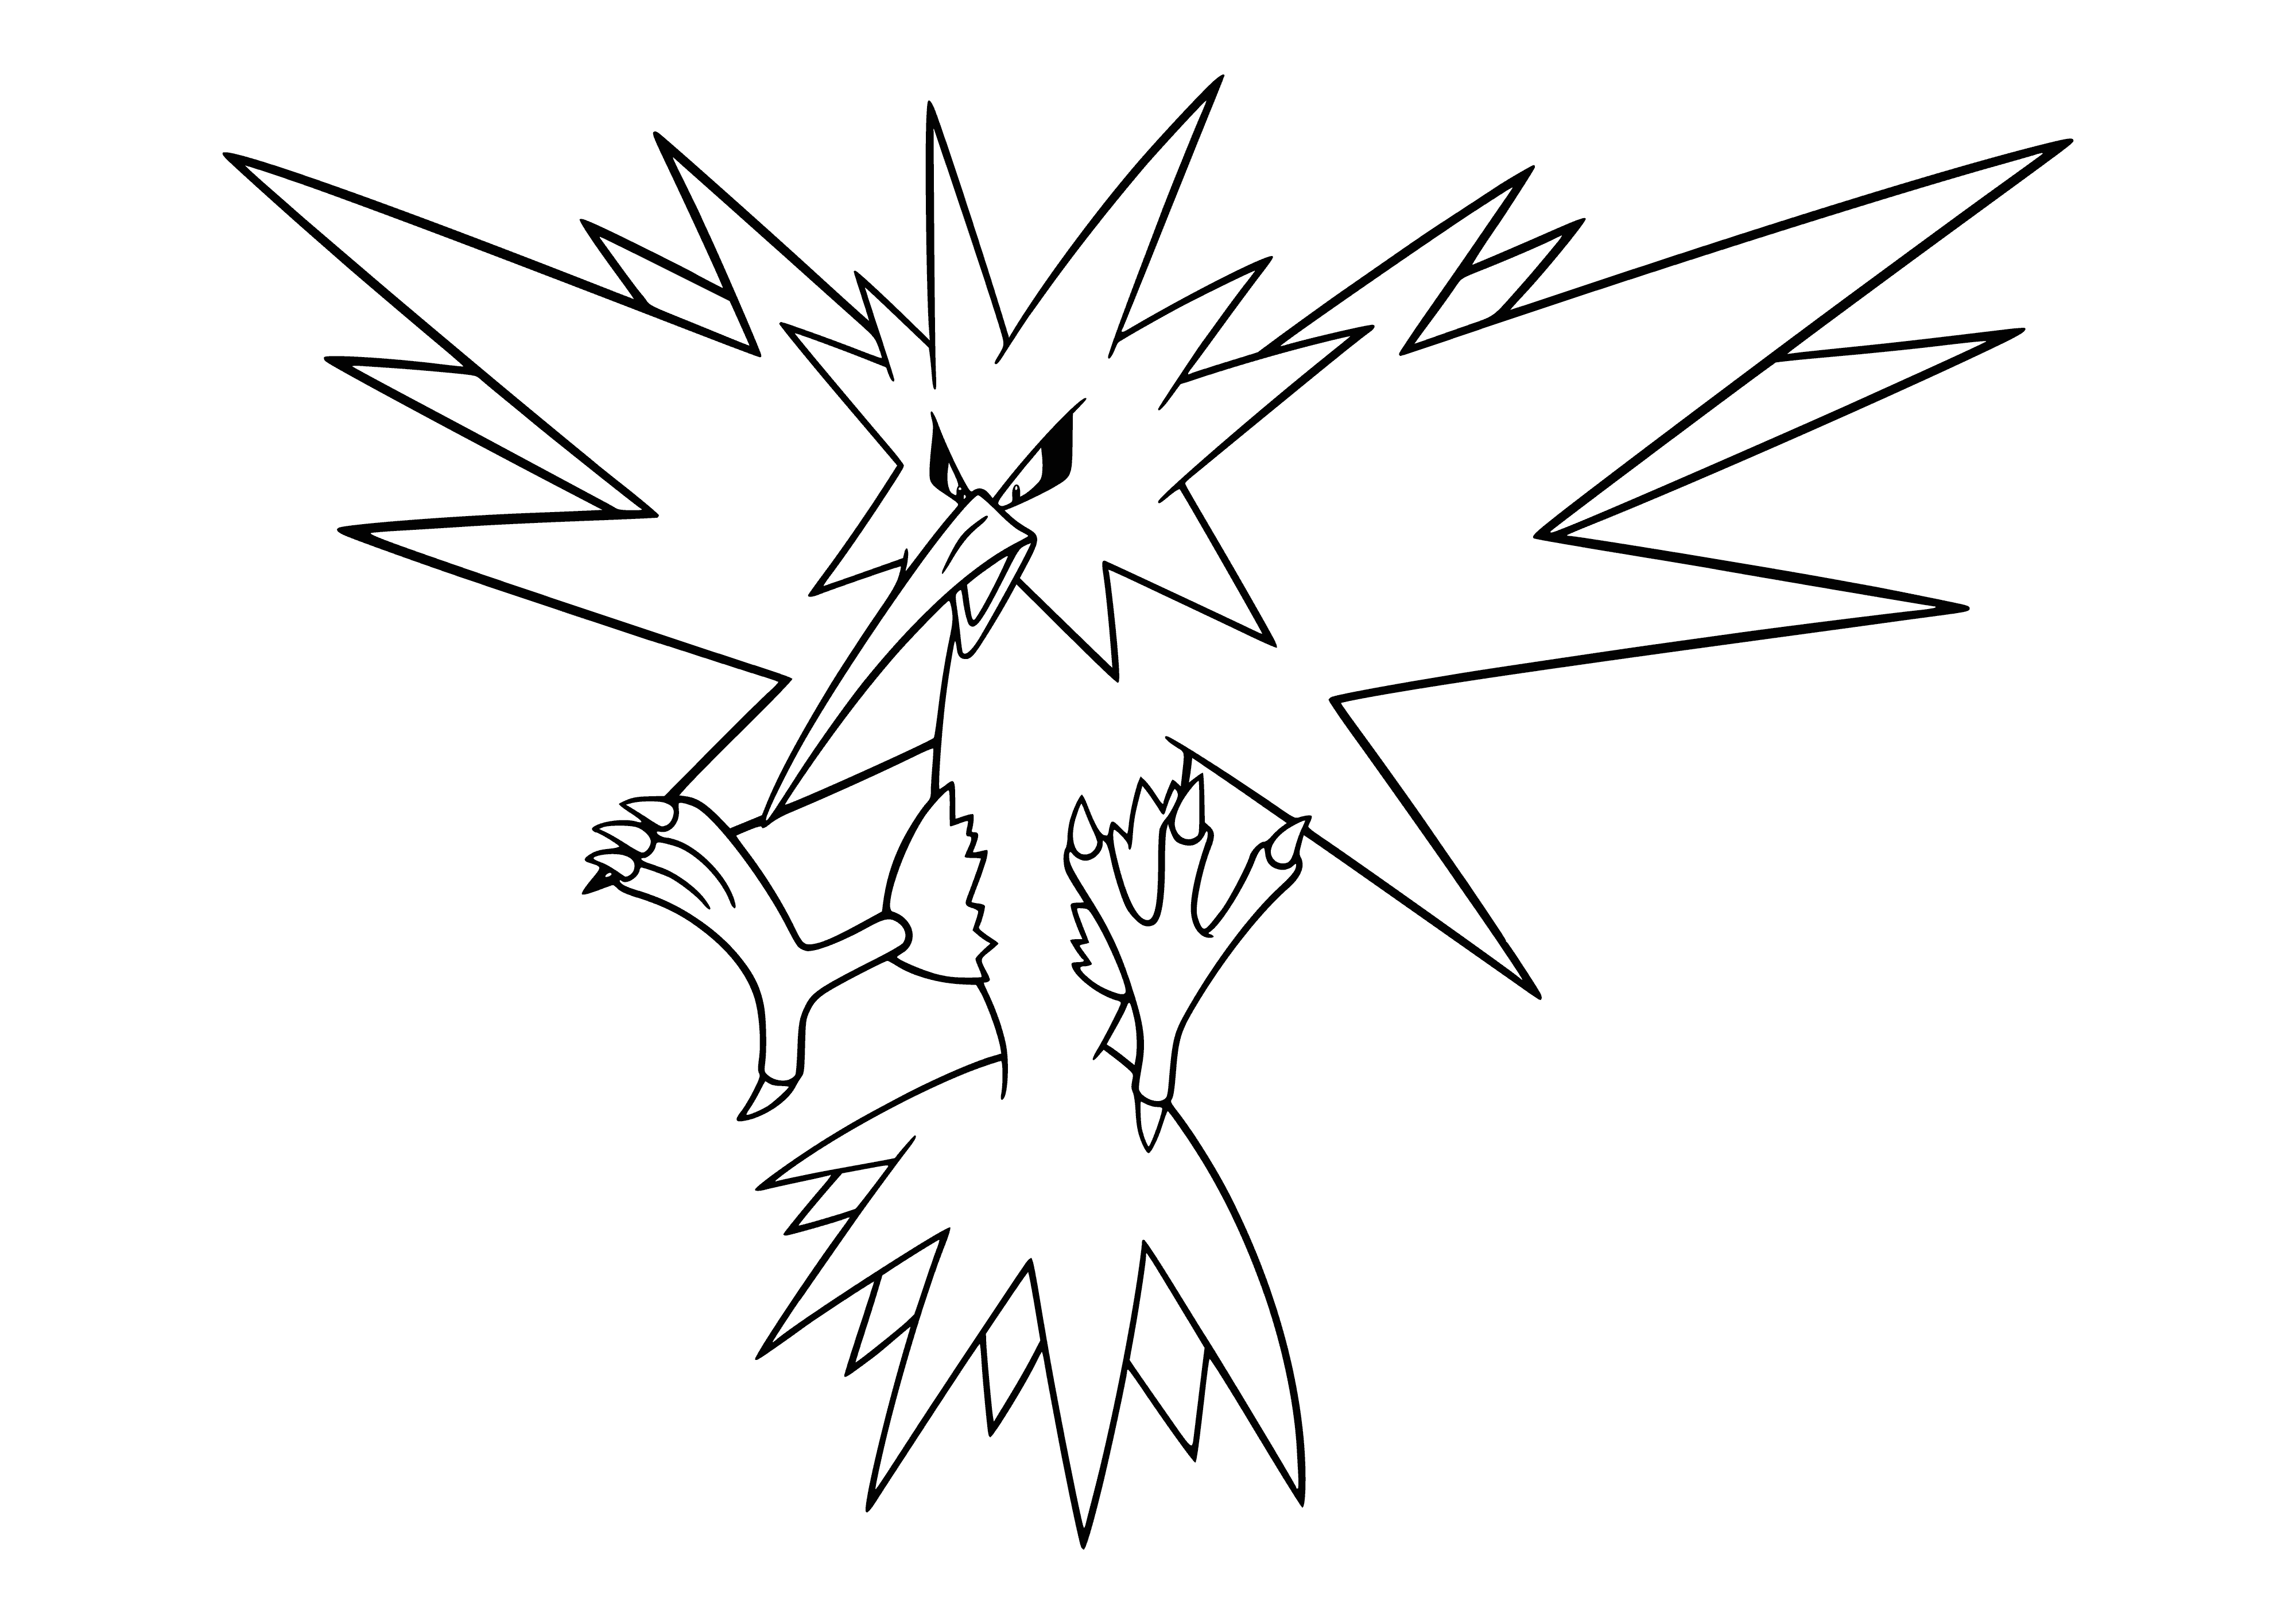 coloring page: Yellow-feathered, long-beaked pokemon with spiky wings & red eyes, three talons on each foot, and long, forked tail.